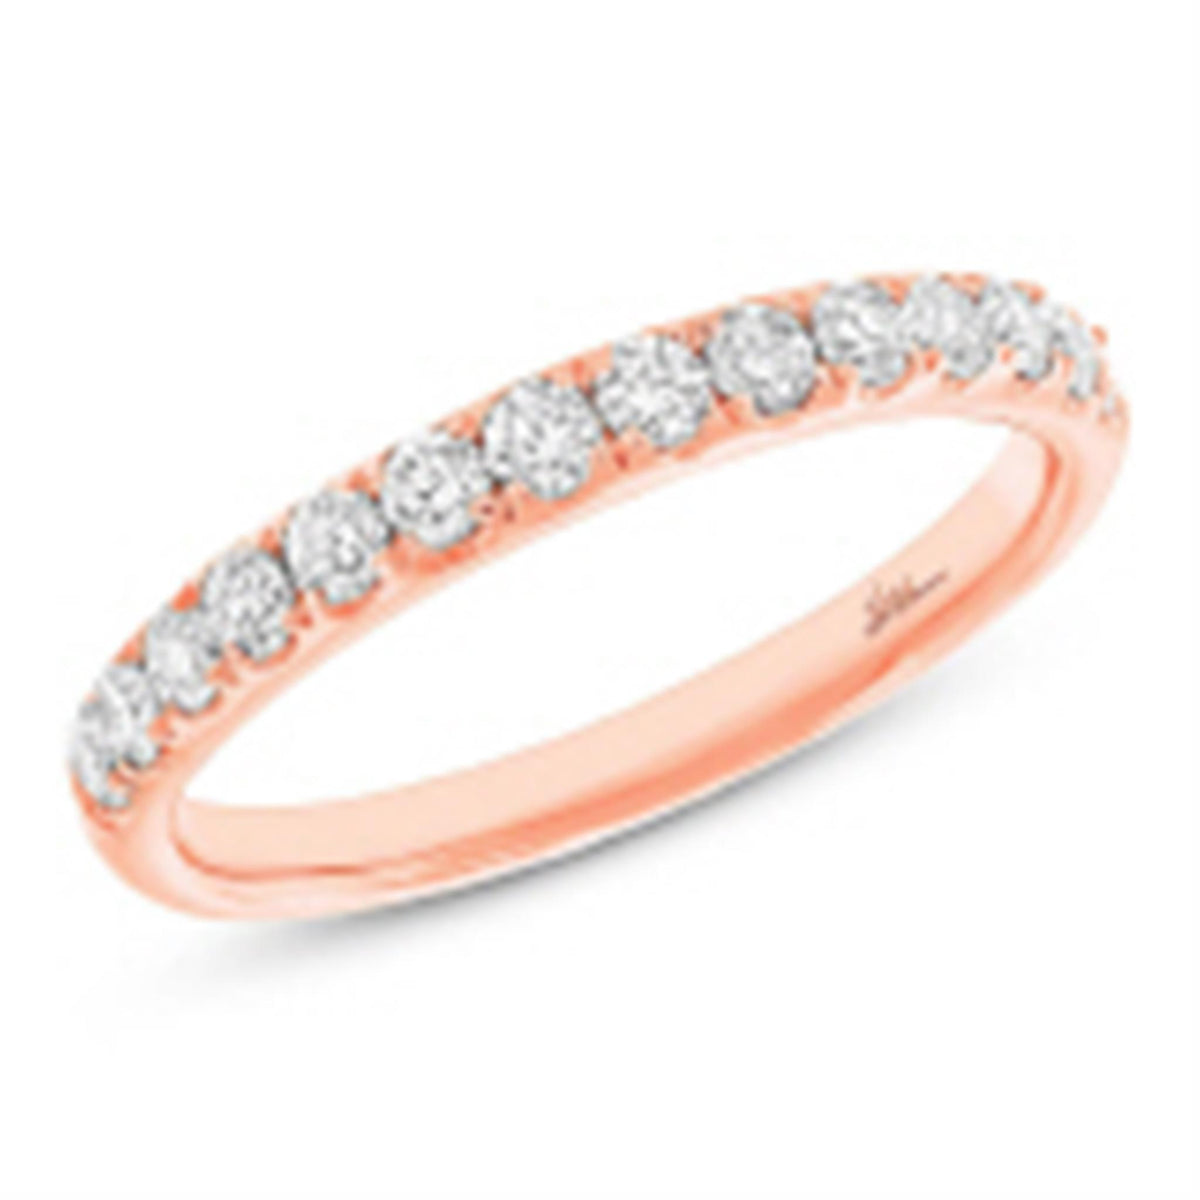 14Kt Rose Gold Prong Set Wedding Ring With 0.16cttw Natural Diamonds